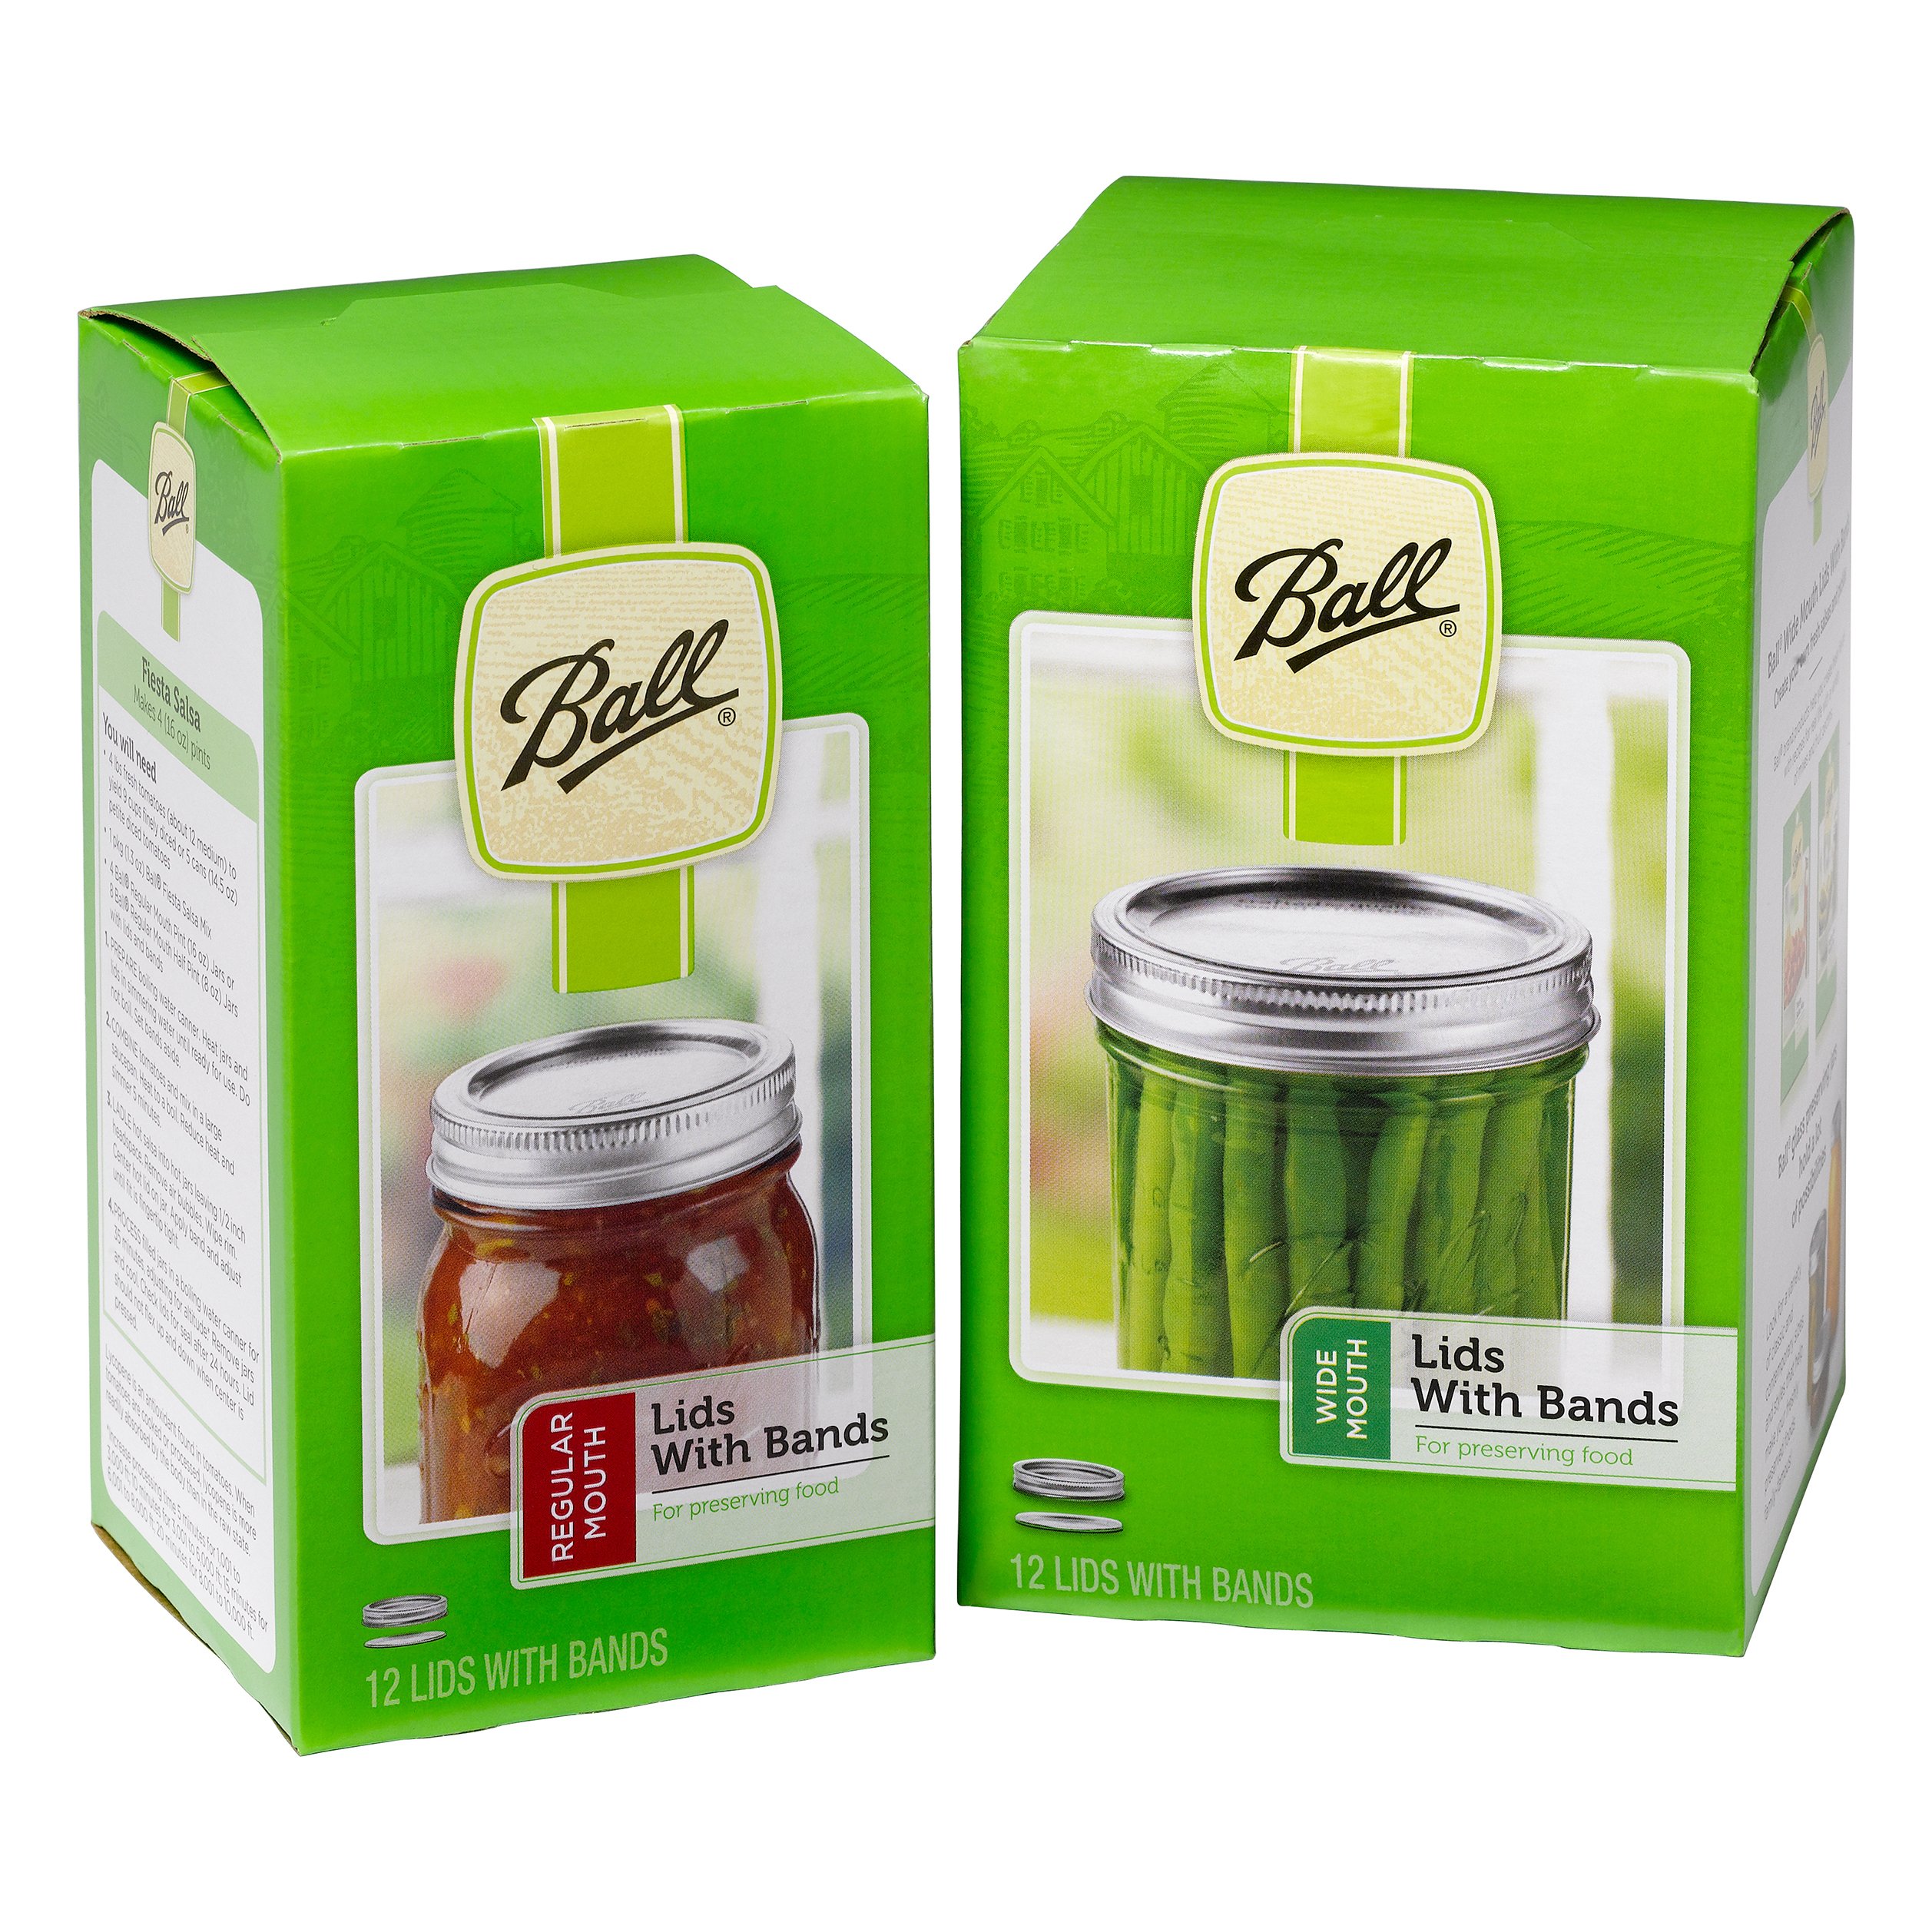 HOMKULA 9-Piece Canning Supplies, Includes 20 Quart Canning - Import It All